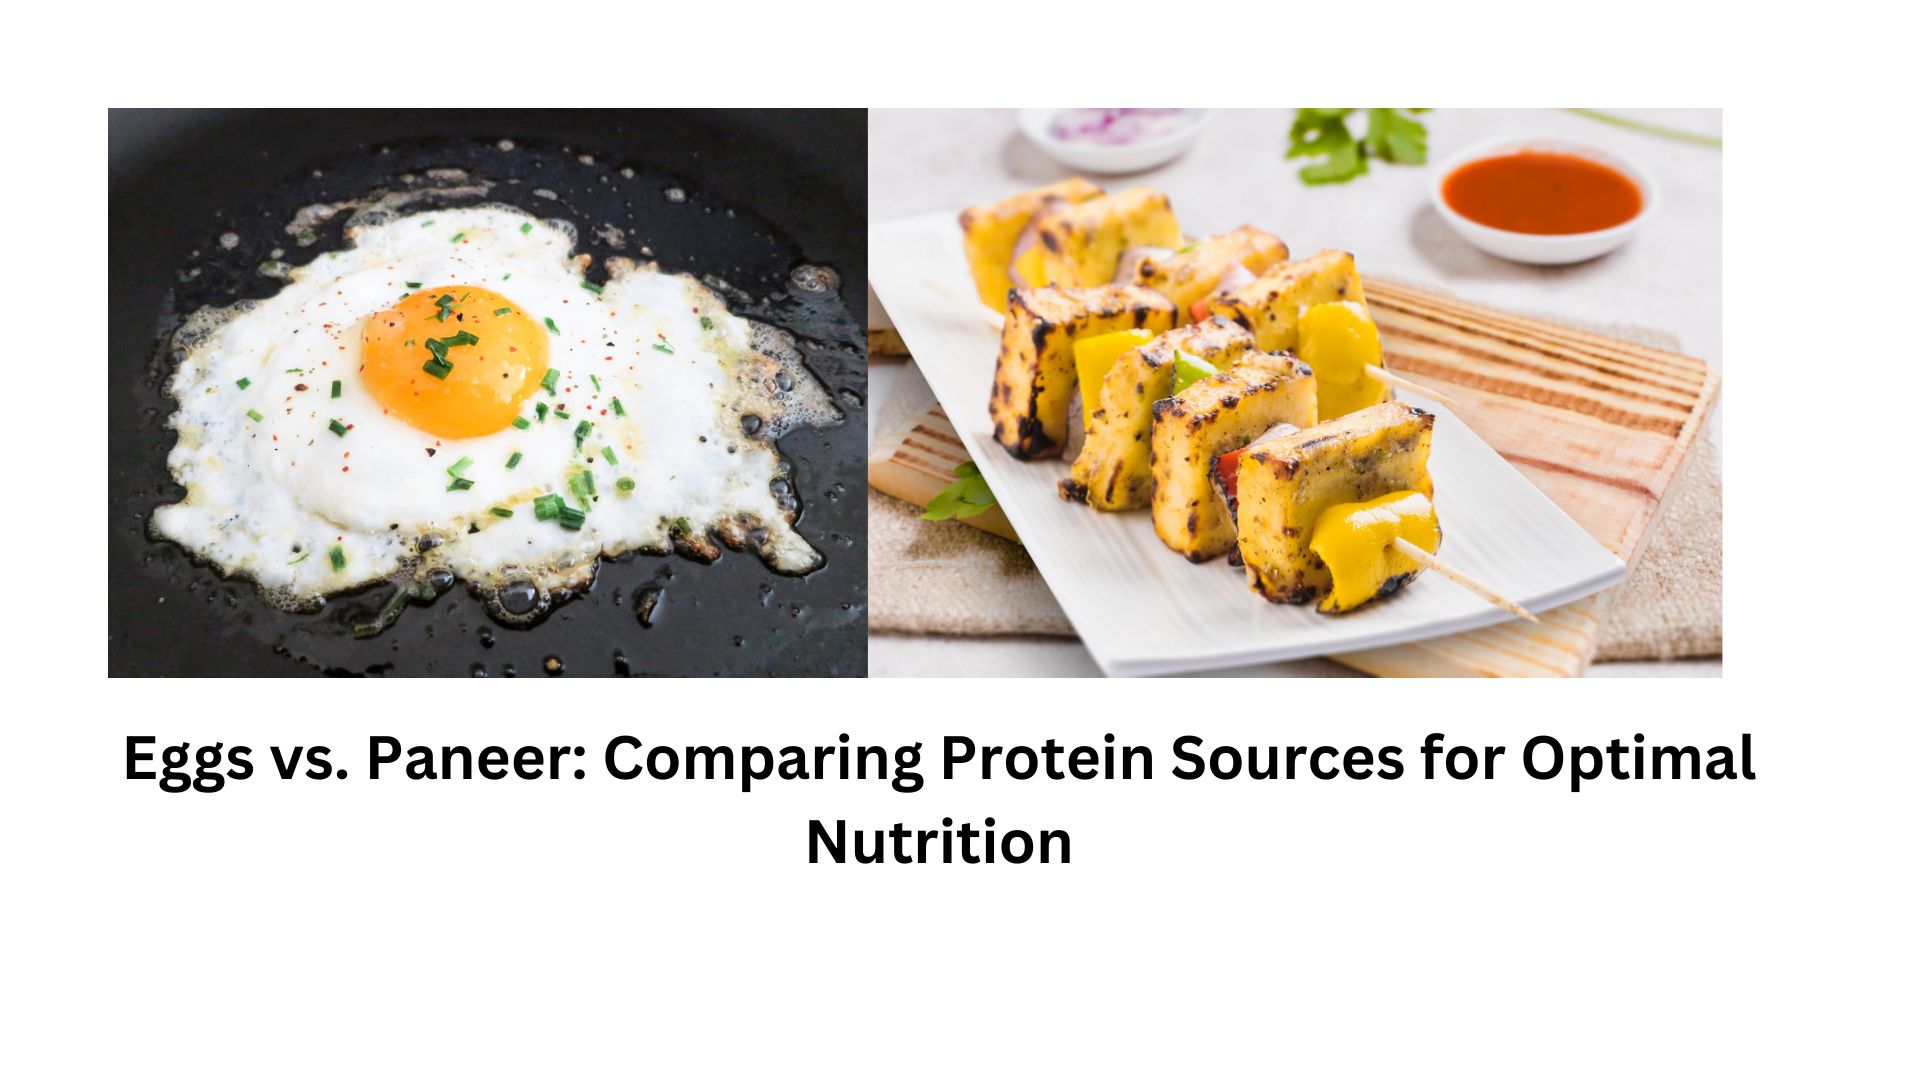 Eggs vs. Paneer: Comparing Protein Sources for Optimal Nutrition